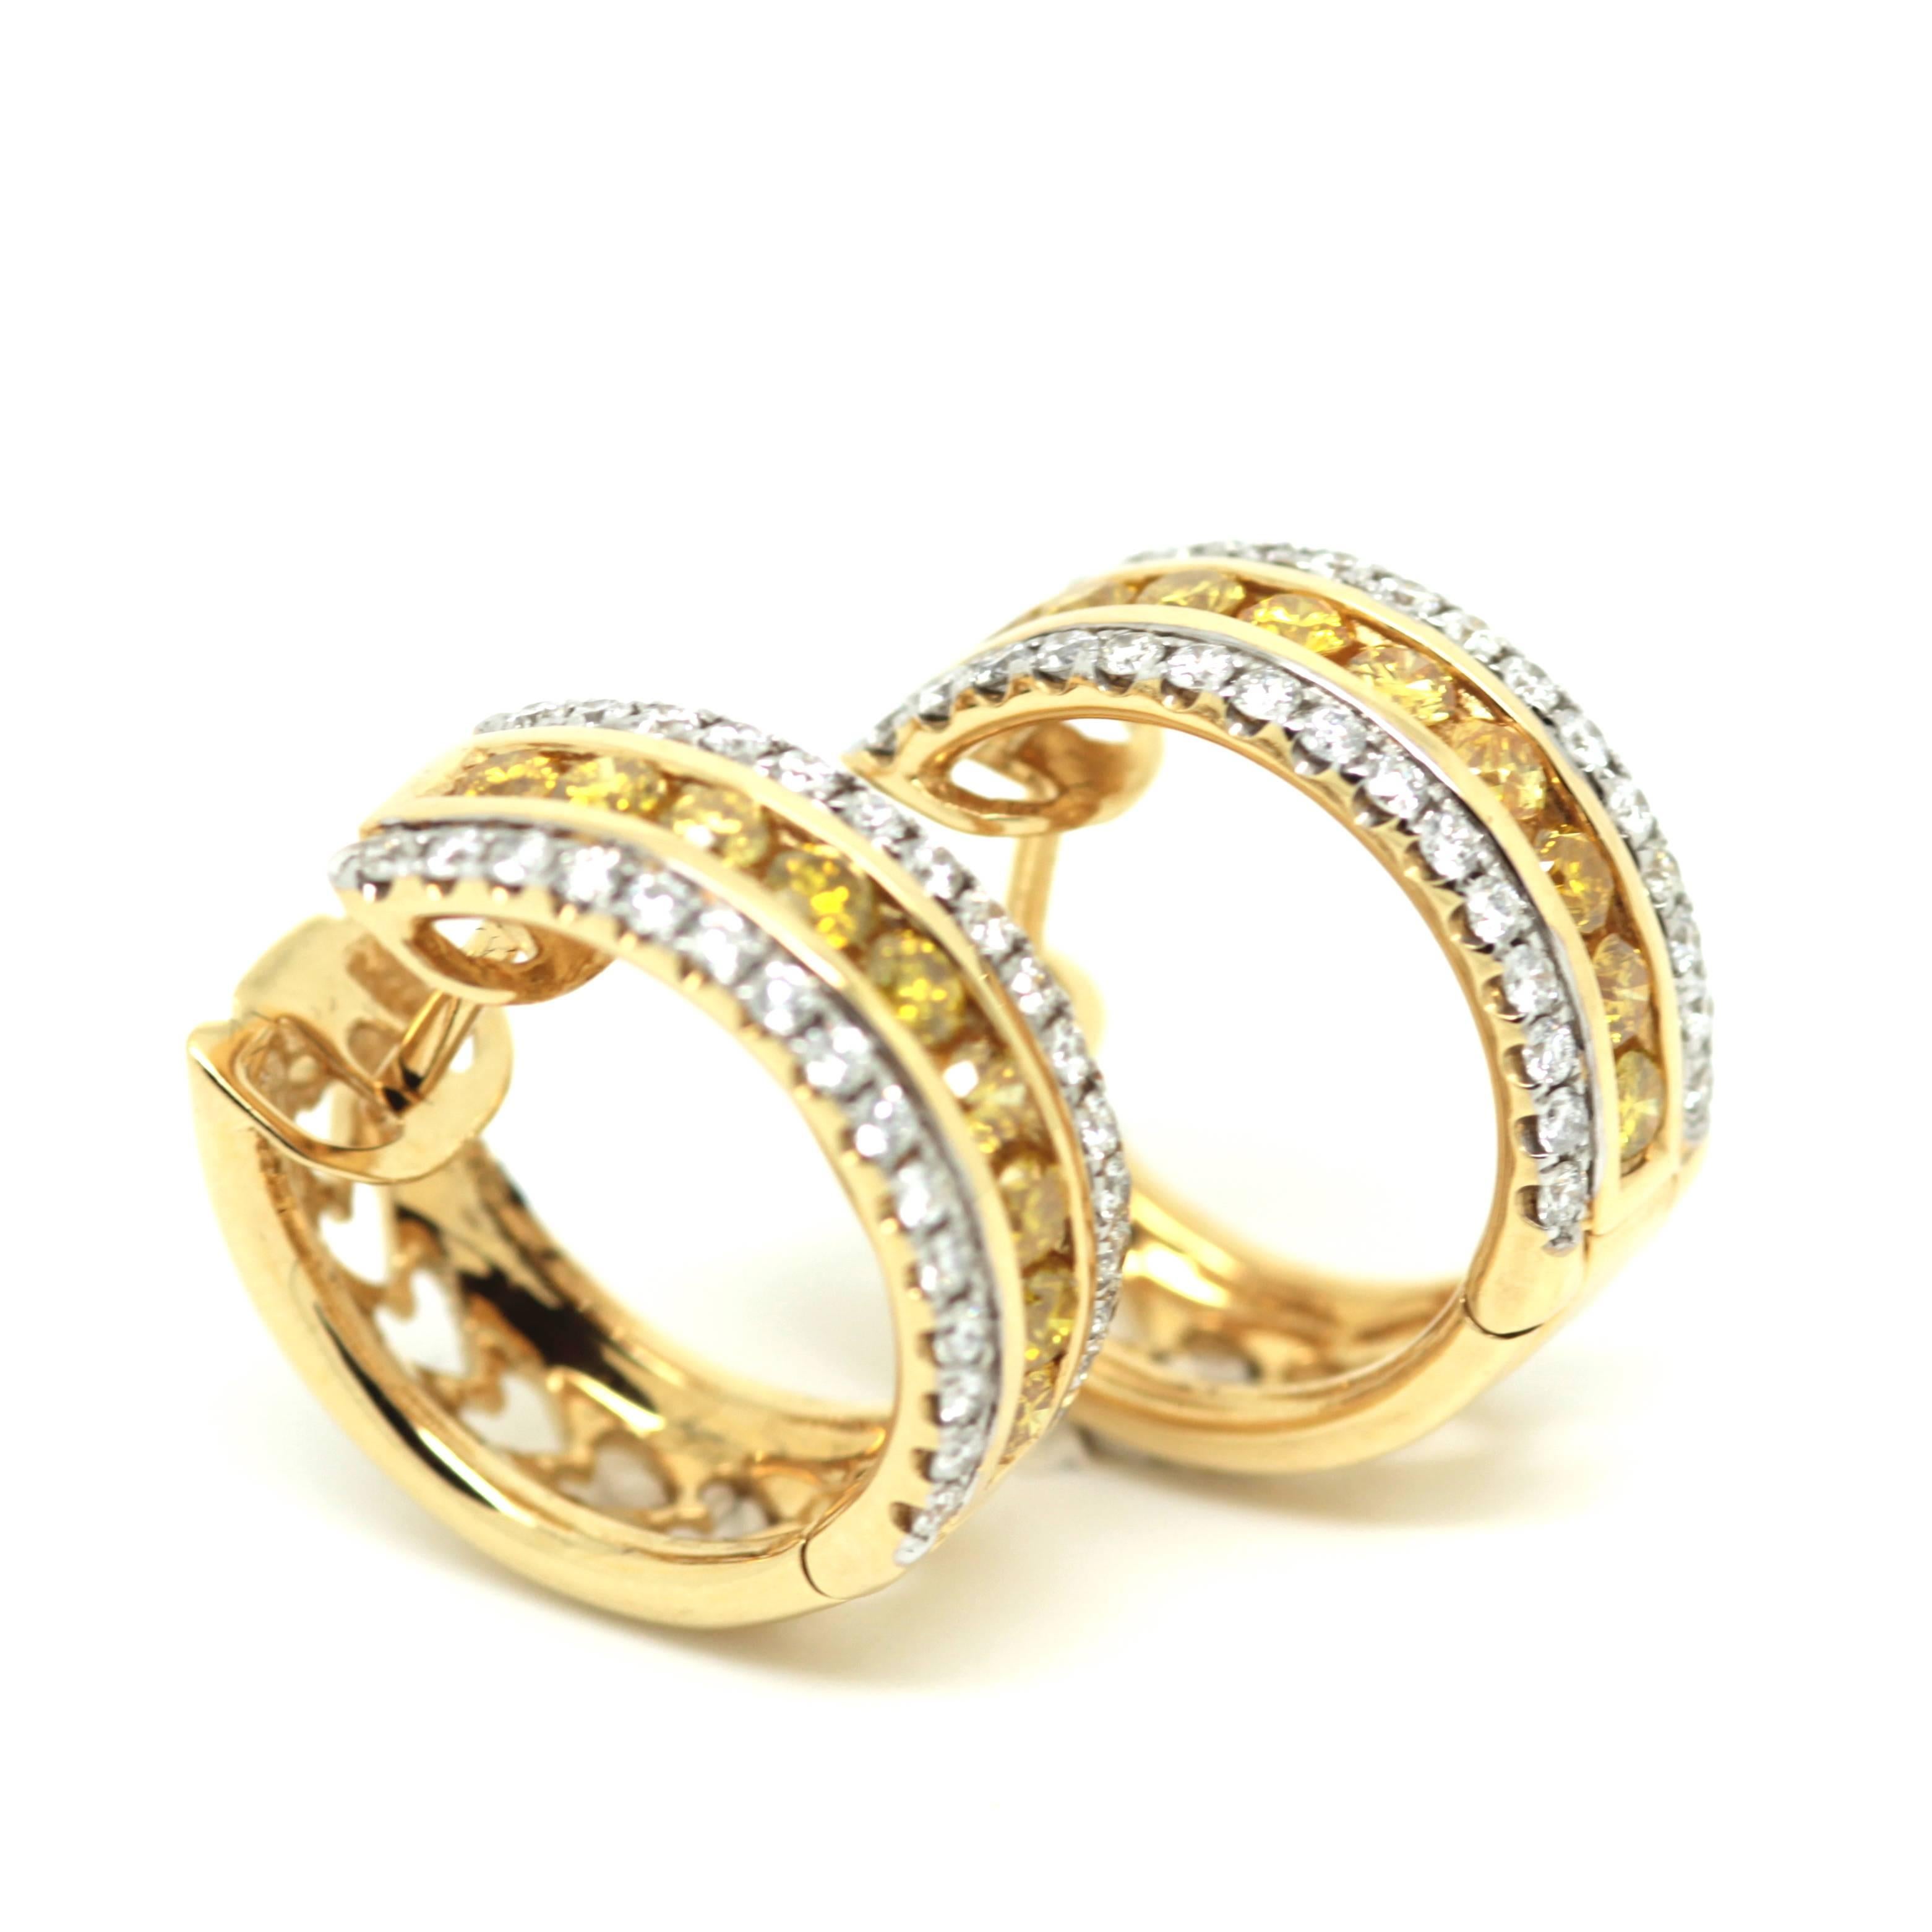 Modern Circular 1.62 Carat Fancy Yellow and White Diamond Earrings For Sale